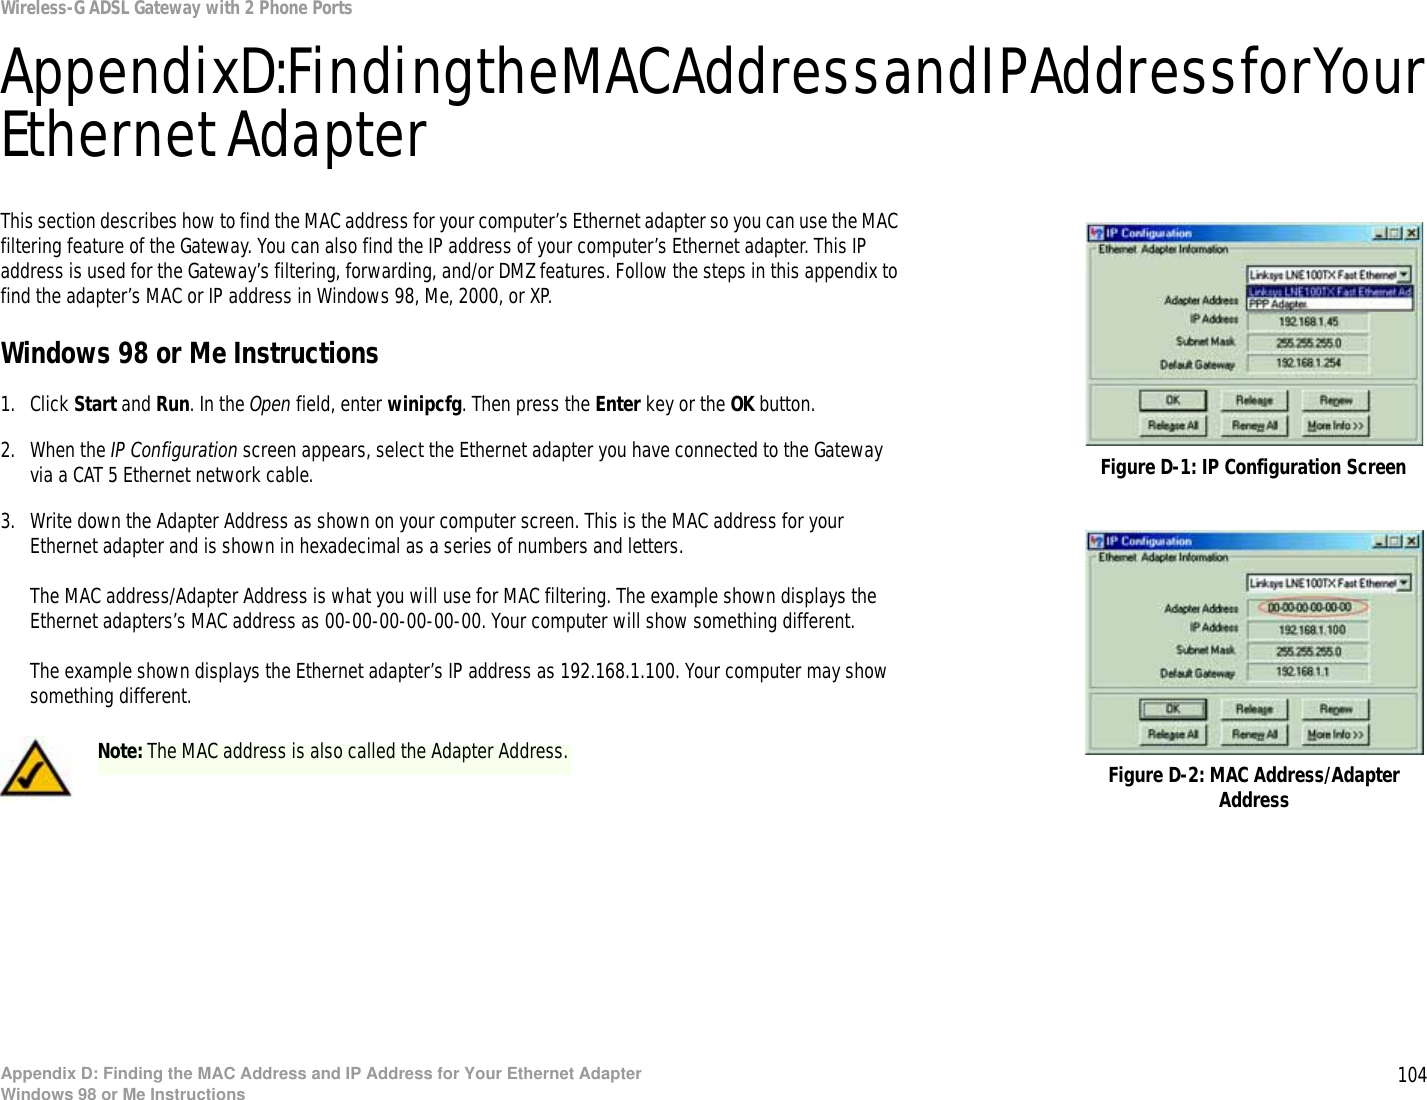 104Appendix D: Finding the MAC Address and IP Address for Your Ethernet AdapterWindows 98 or Me InstructionsWireless-G ADSL Gateway with 2 Phone PortsAppendix D: Finding the MAC Address and IP Address for Yo ur Ethernet AdapterThis section describes how to find the MAC address for your computer’s Ethernet adapter so you can use the MAC filtering feature of the Gateway. You can also find the IP address of your computer’s Ethernet adapter. This IP address is used for the Gateway’s filtering, forwarding, and/or DMZ features. Follow the steps in this appendix to find the adapter’s MAC or IP address in Windows 98, Me, 2000, or XP.Windows 98 or Me Instructions1. Click Start and Run. In the Open field, enter winipcfg. Then press the Enter key or the OK button. 2. When the IP Configuration screen appears, select the Ethernet adapter you have connected to the Gateway via a CAT 5 Ethernet network cable.3. Write down the Adapter Address as shown on your computer screen. This is the MAC address for your Ethernet adapter and is shown in hexadecimal as a series of numbers and letters.The MAC address/Adapter Address is what you will use for MAC filtering. The example shown displays the Ethernet adapters’s MAC address as 00-00-00-00-00-00. Your computer will show something different.The example shown displays the Ethernet adapter’s IP address as 192.168.1.100. Your computer may show something different.Figure D-2: MAC Address/Adapter AddressFigure D-1: IP Configuration ScreenNote: The MAC address is also called the Adapter Address.